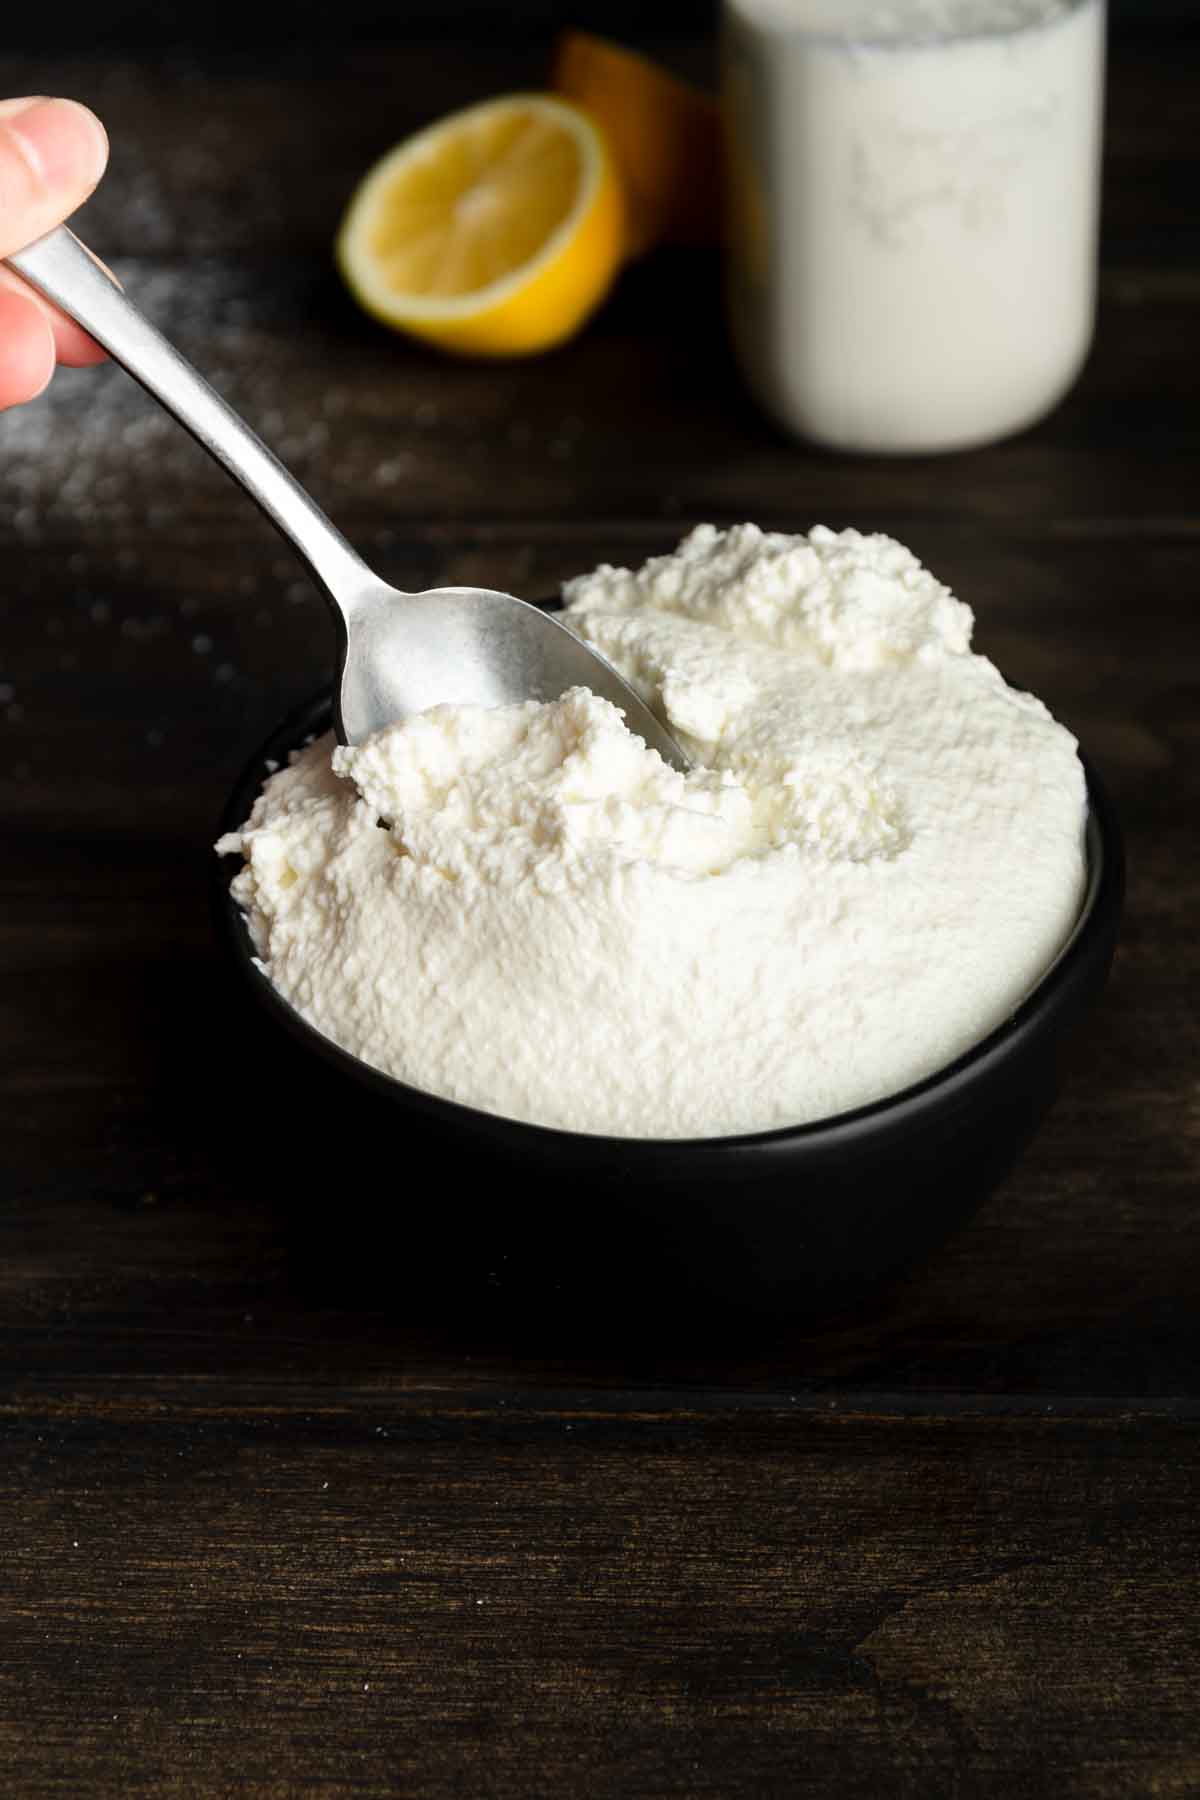 A spoon in a bowl filled with homemade ricotta cheese.